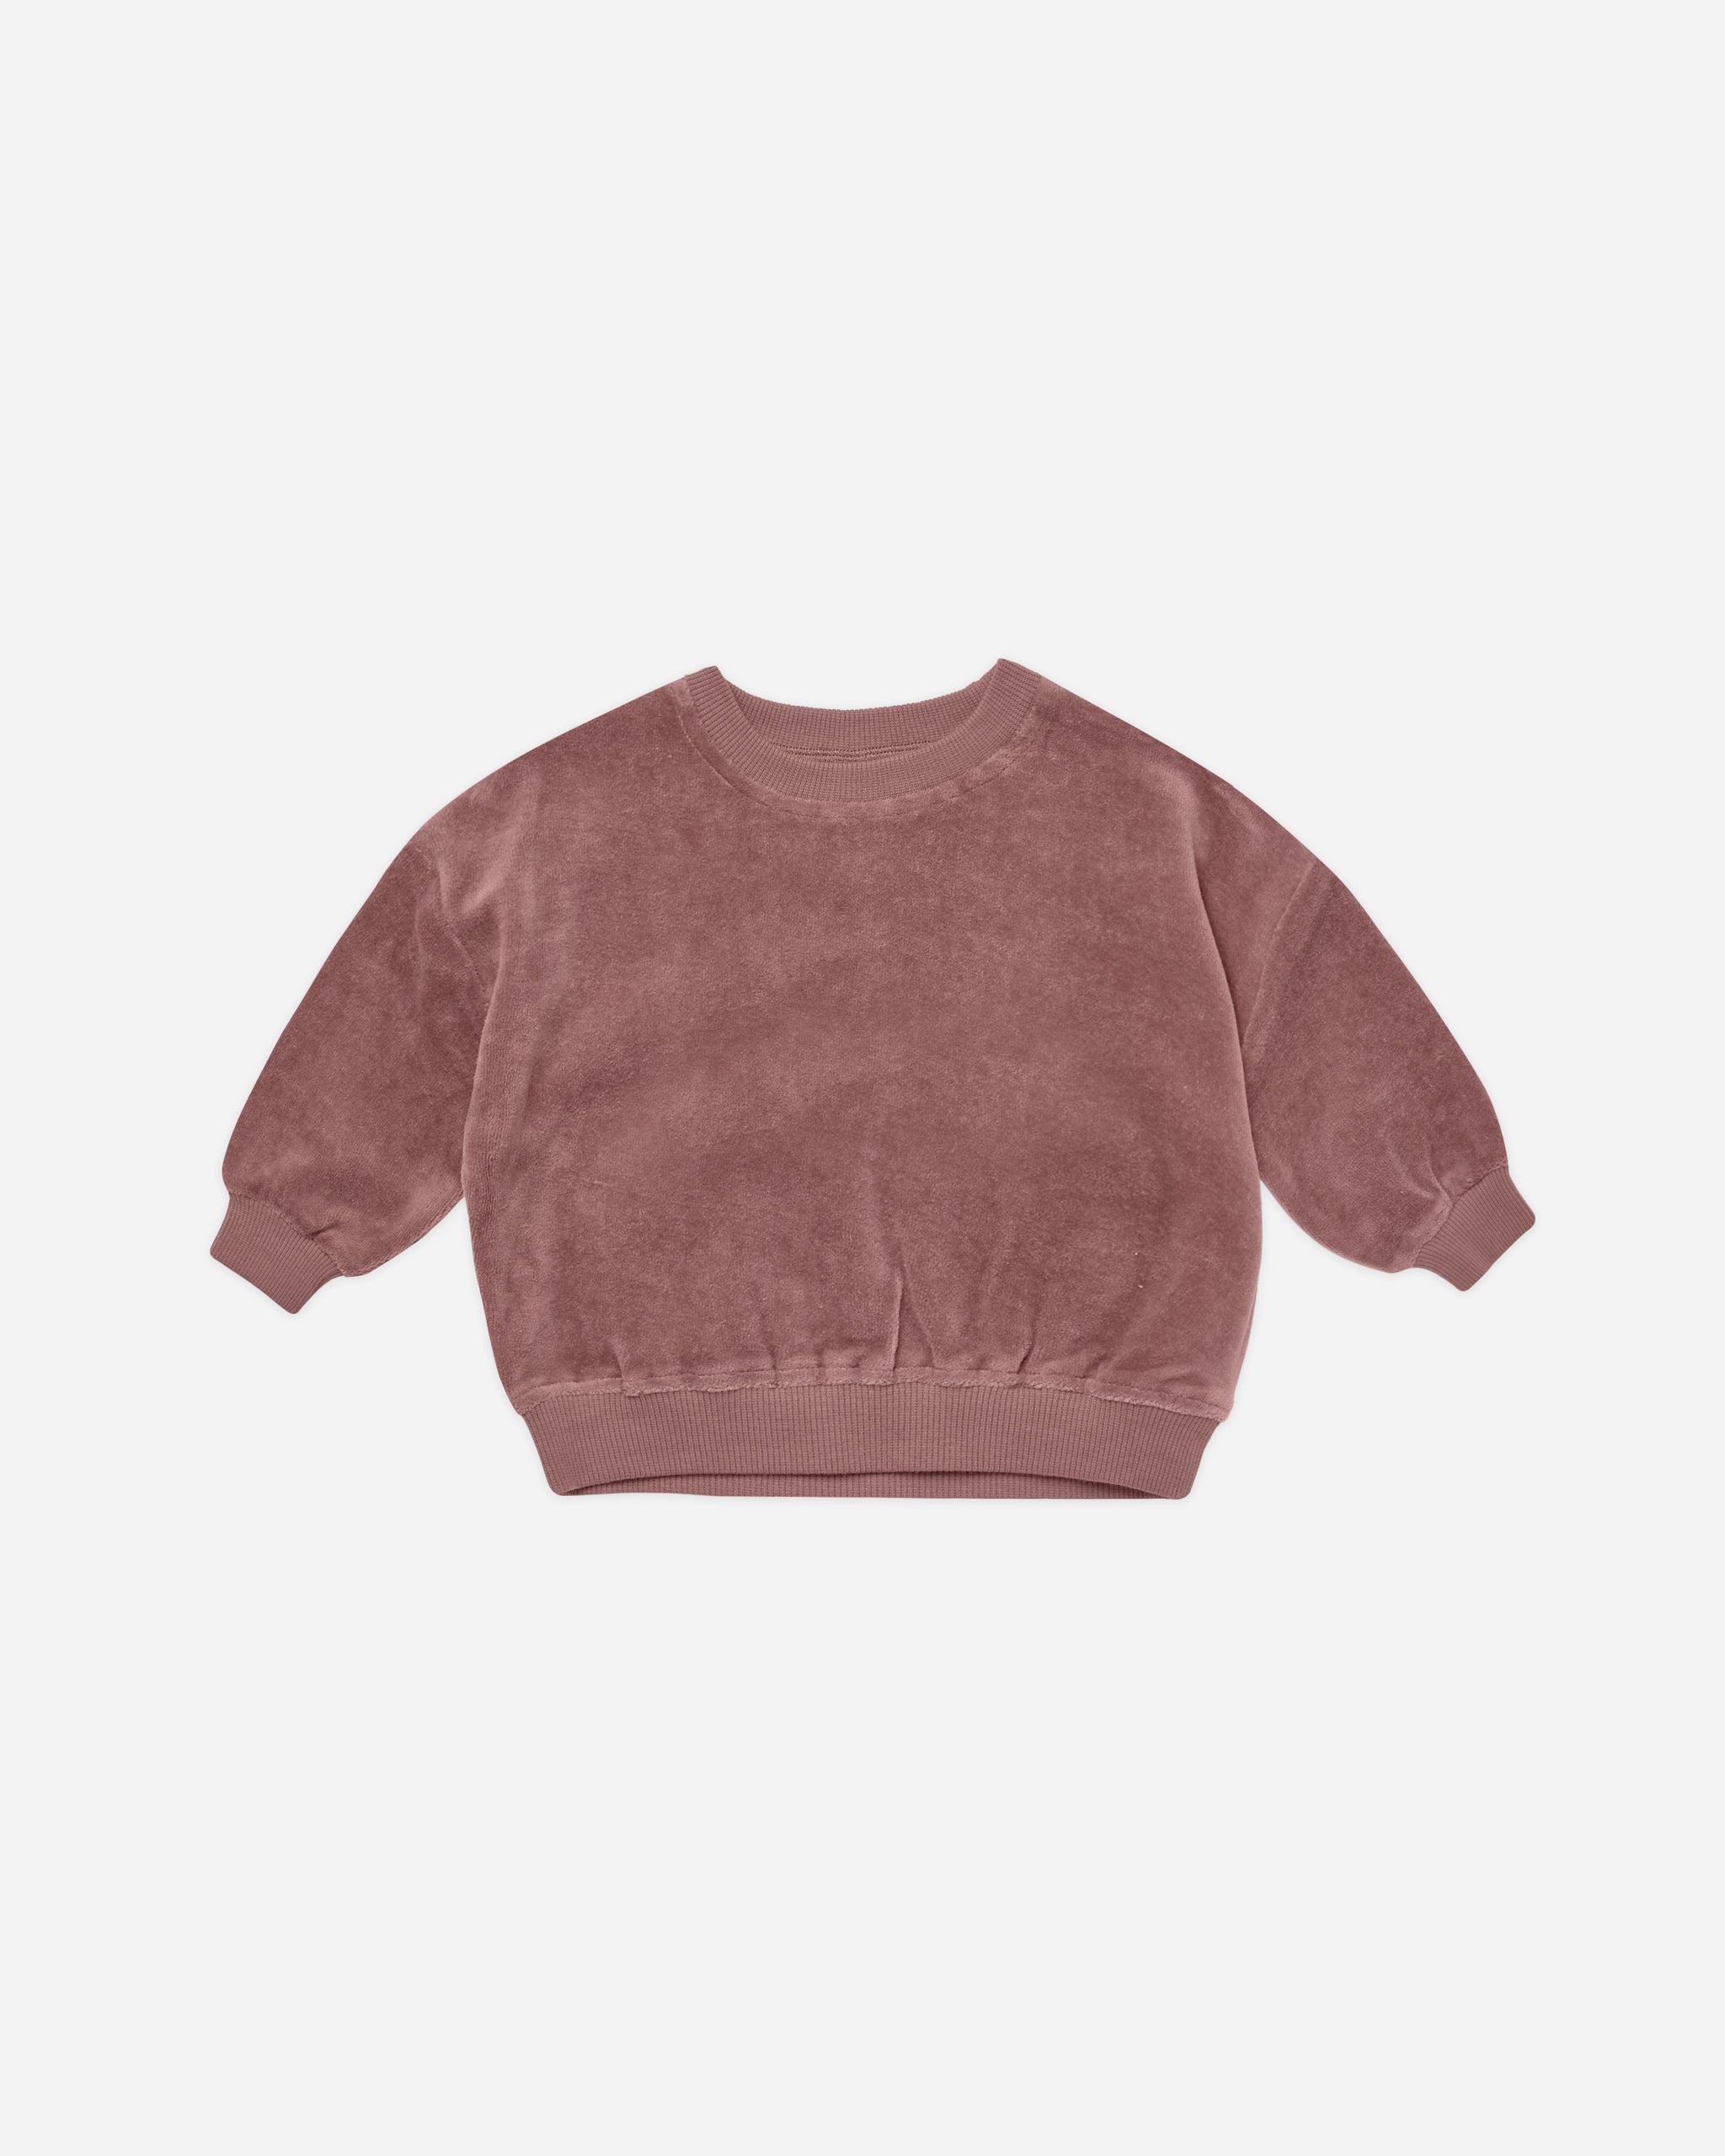 Velour Relaxed Sweatshirt || Fig - Rylee + Cru | Kids Clothes | Trendy Baby Clothes | Modern Infant Outfits |